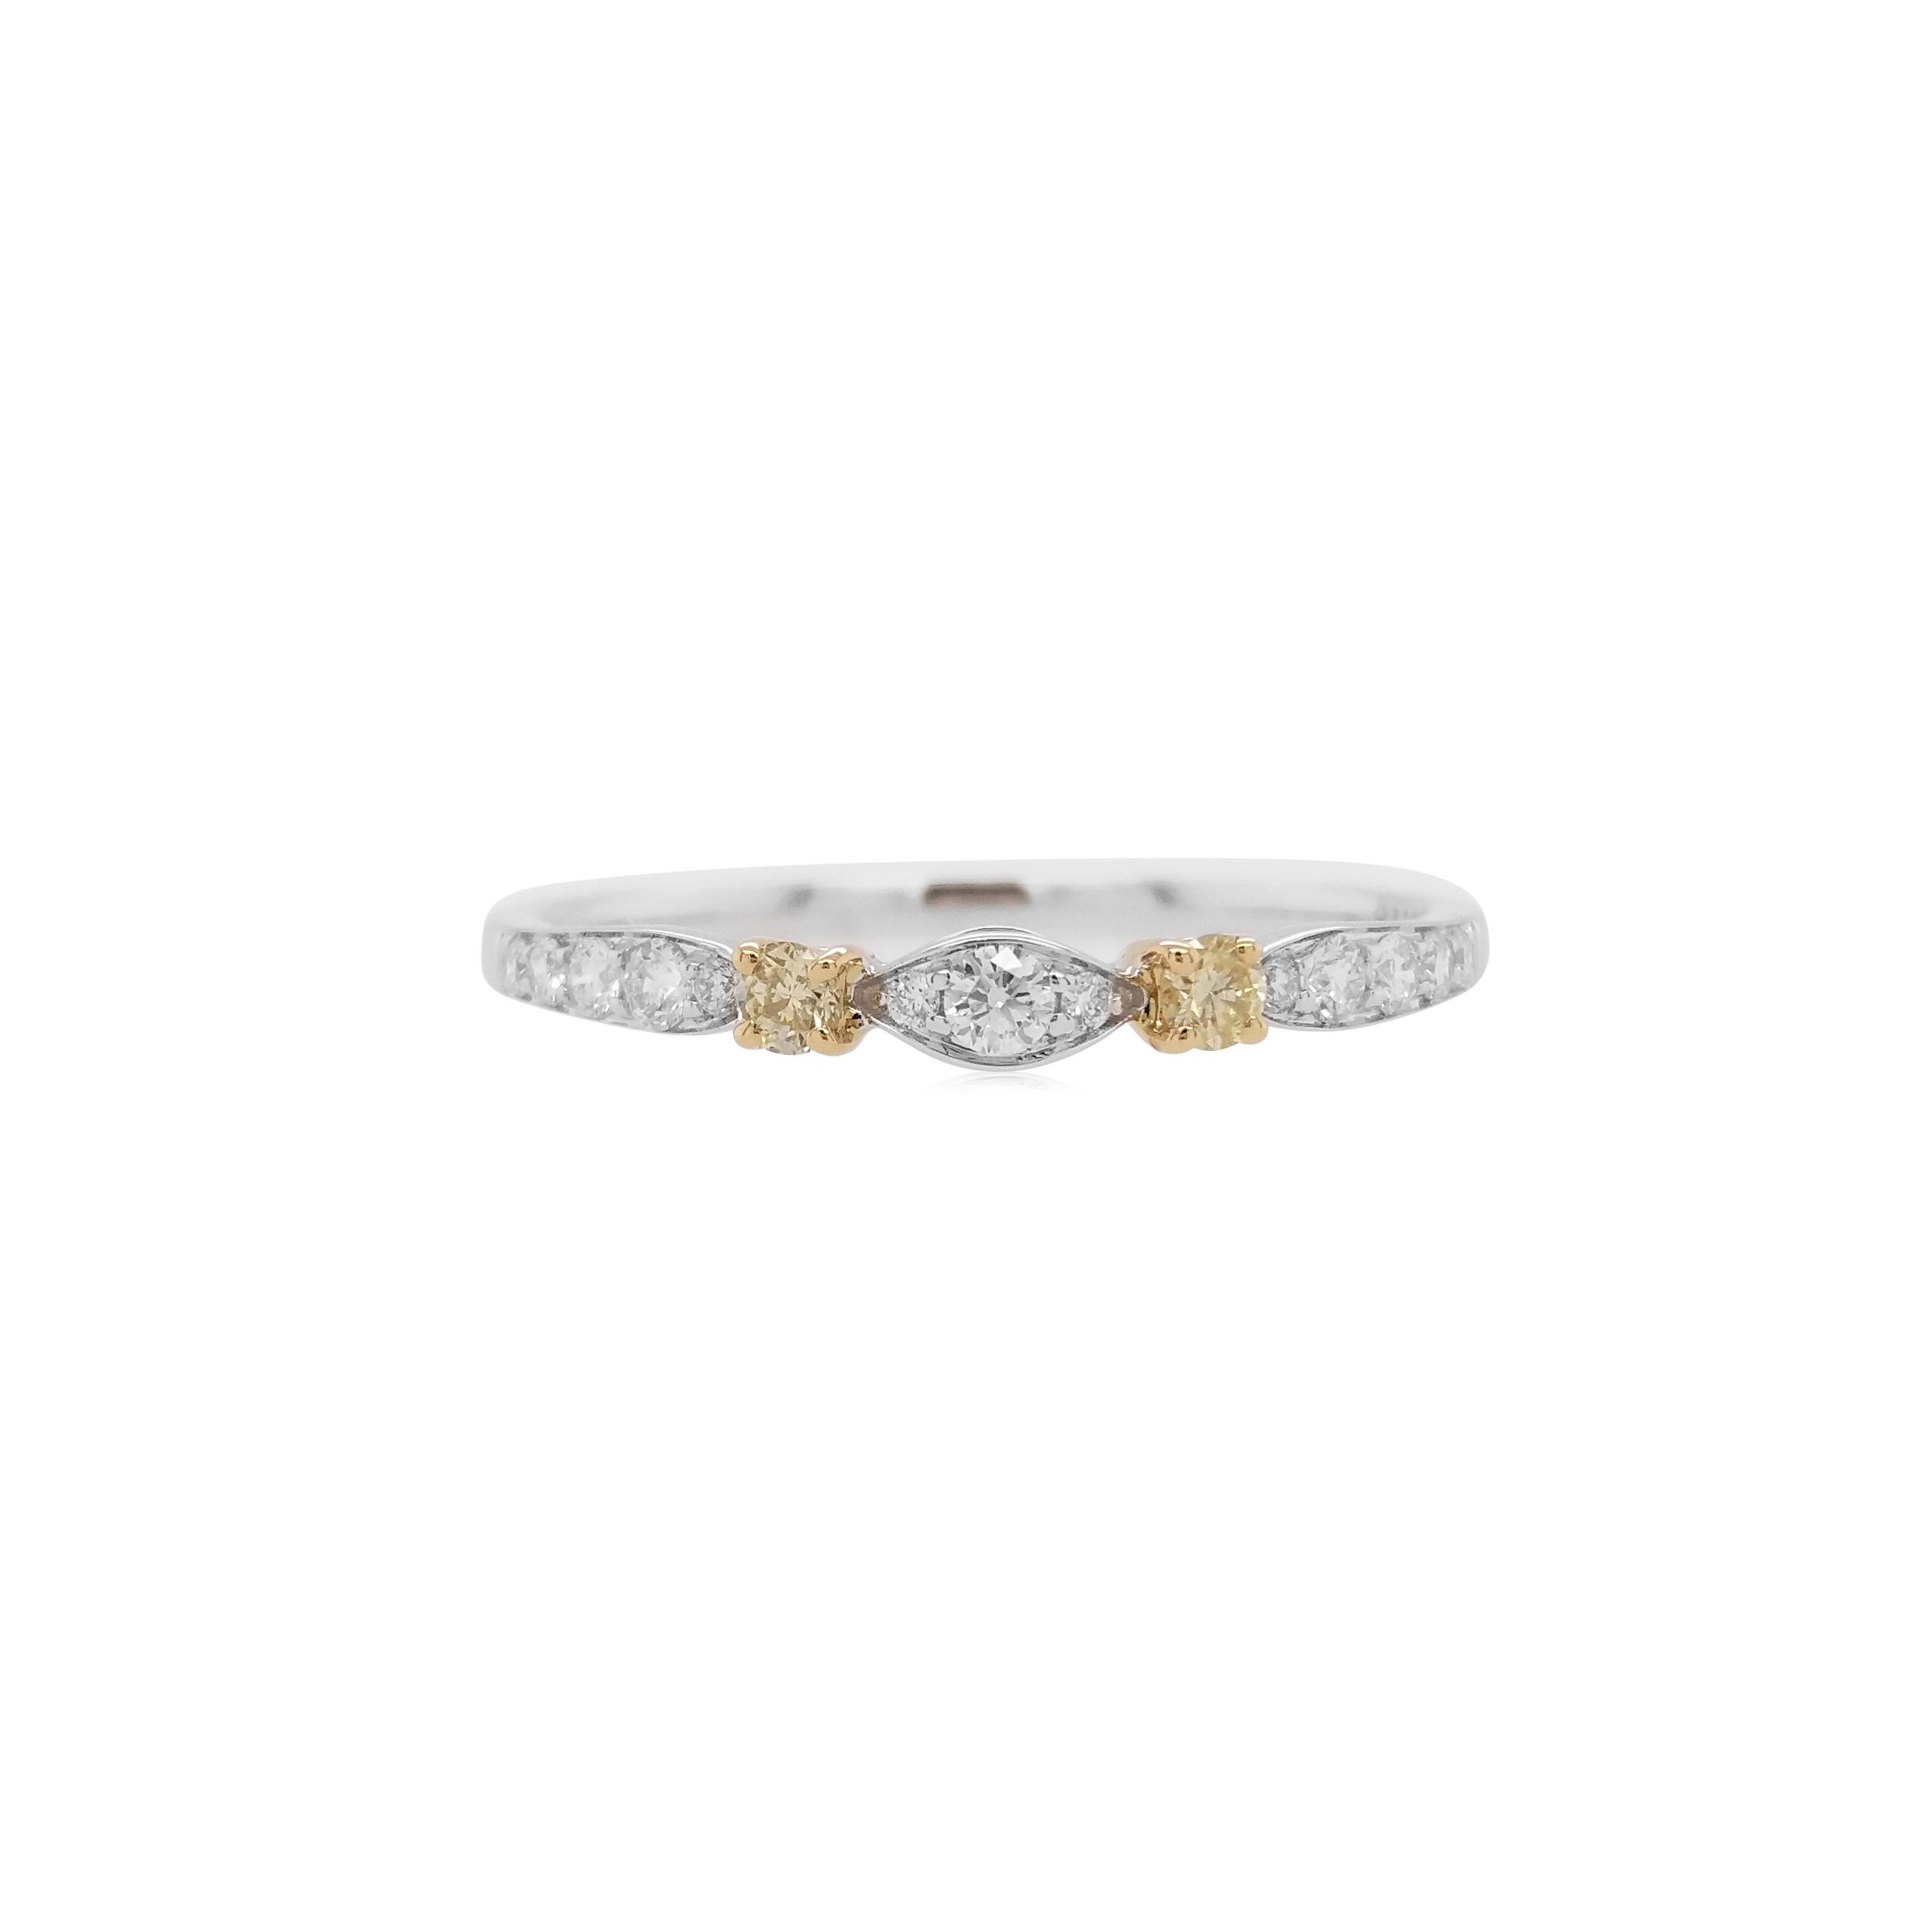 18K Gold ring made with rare and natural yellow diamonds with beautiful luster and fire, complimented with a white diamond ion the centre, a special ring for your loved one.

Yellow Diamonds- 0.07 cts
White diamonds- 0.15 cts

HYT Jewelry is a